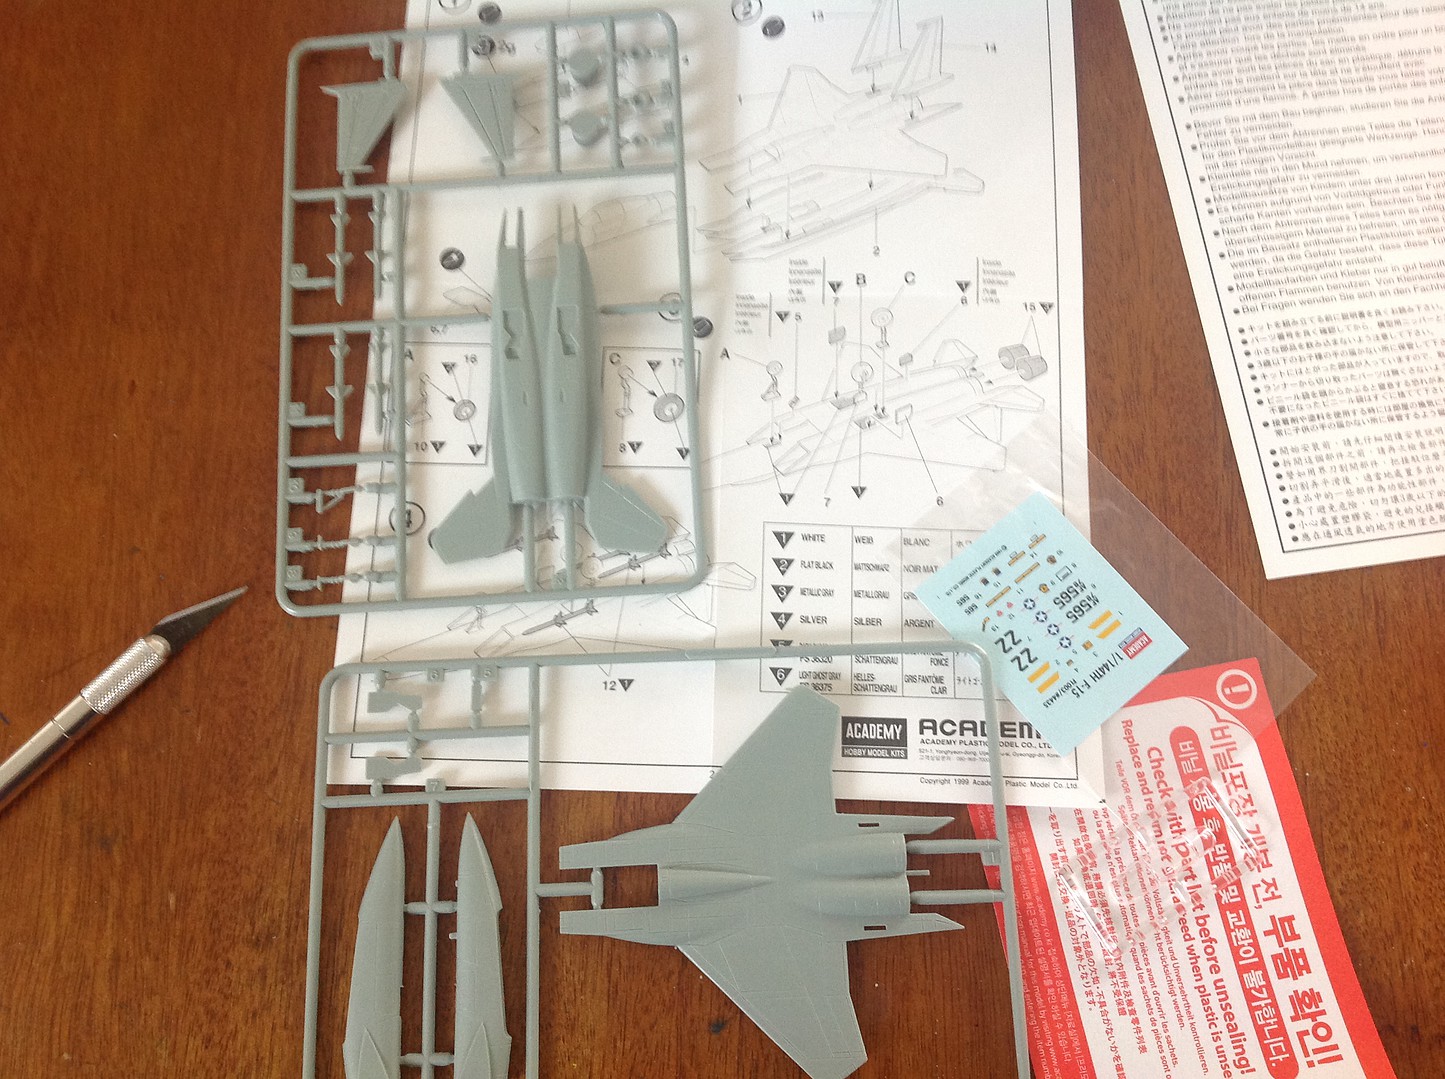 Academy F-15 Eagle Plastic Model Airplane Kit 1/144 Scale #12609